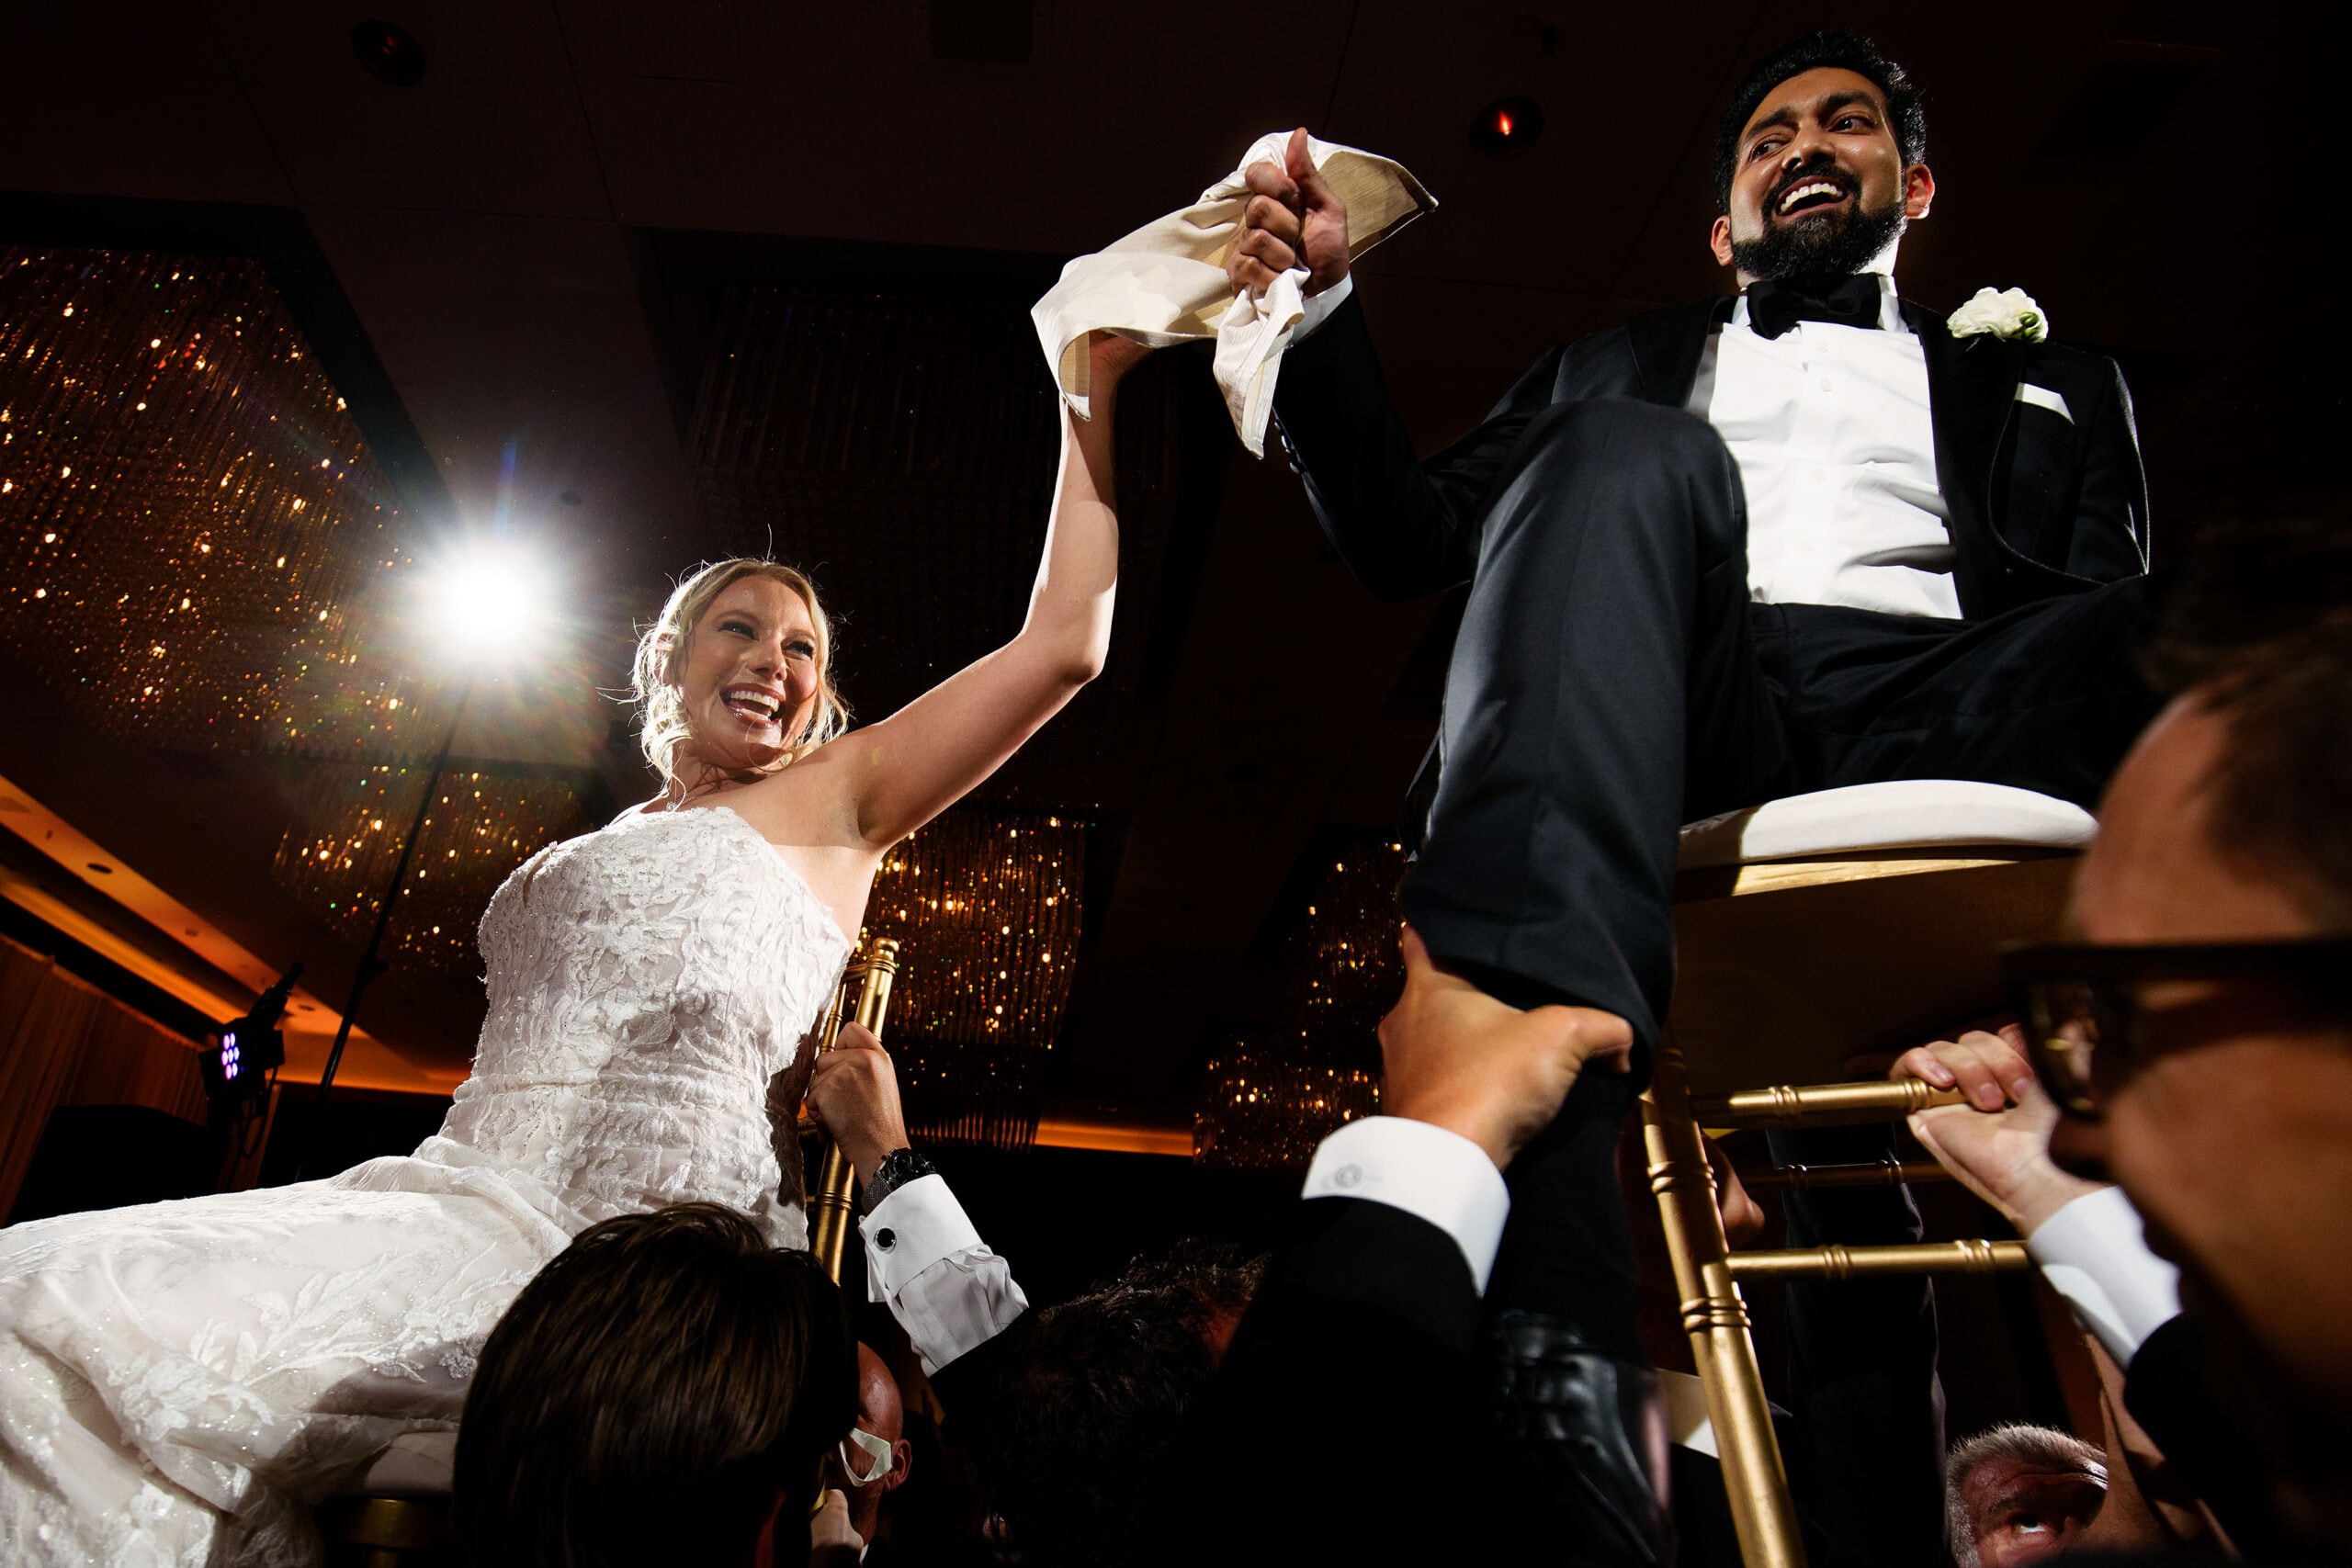 Jessica and Sambit are lifted in chairs on the dance floor during the hora at Four Seasons Hotel Denver